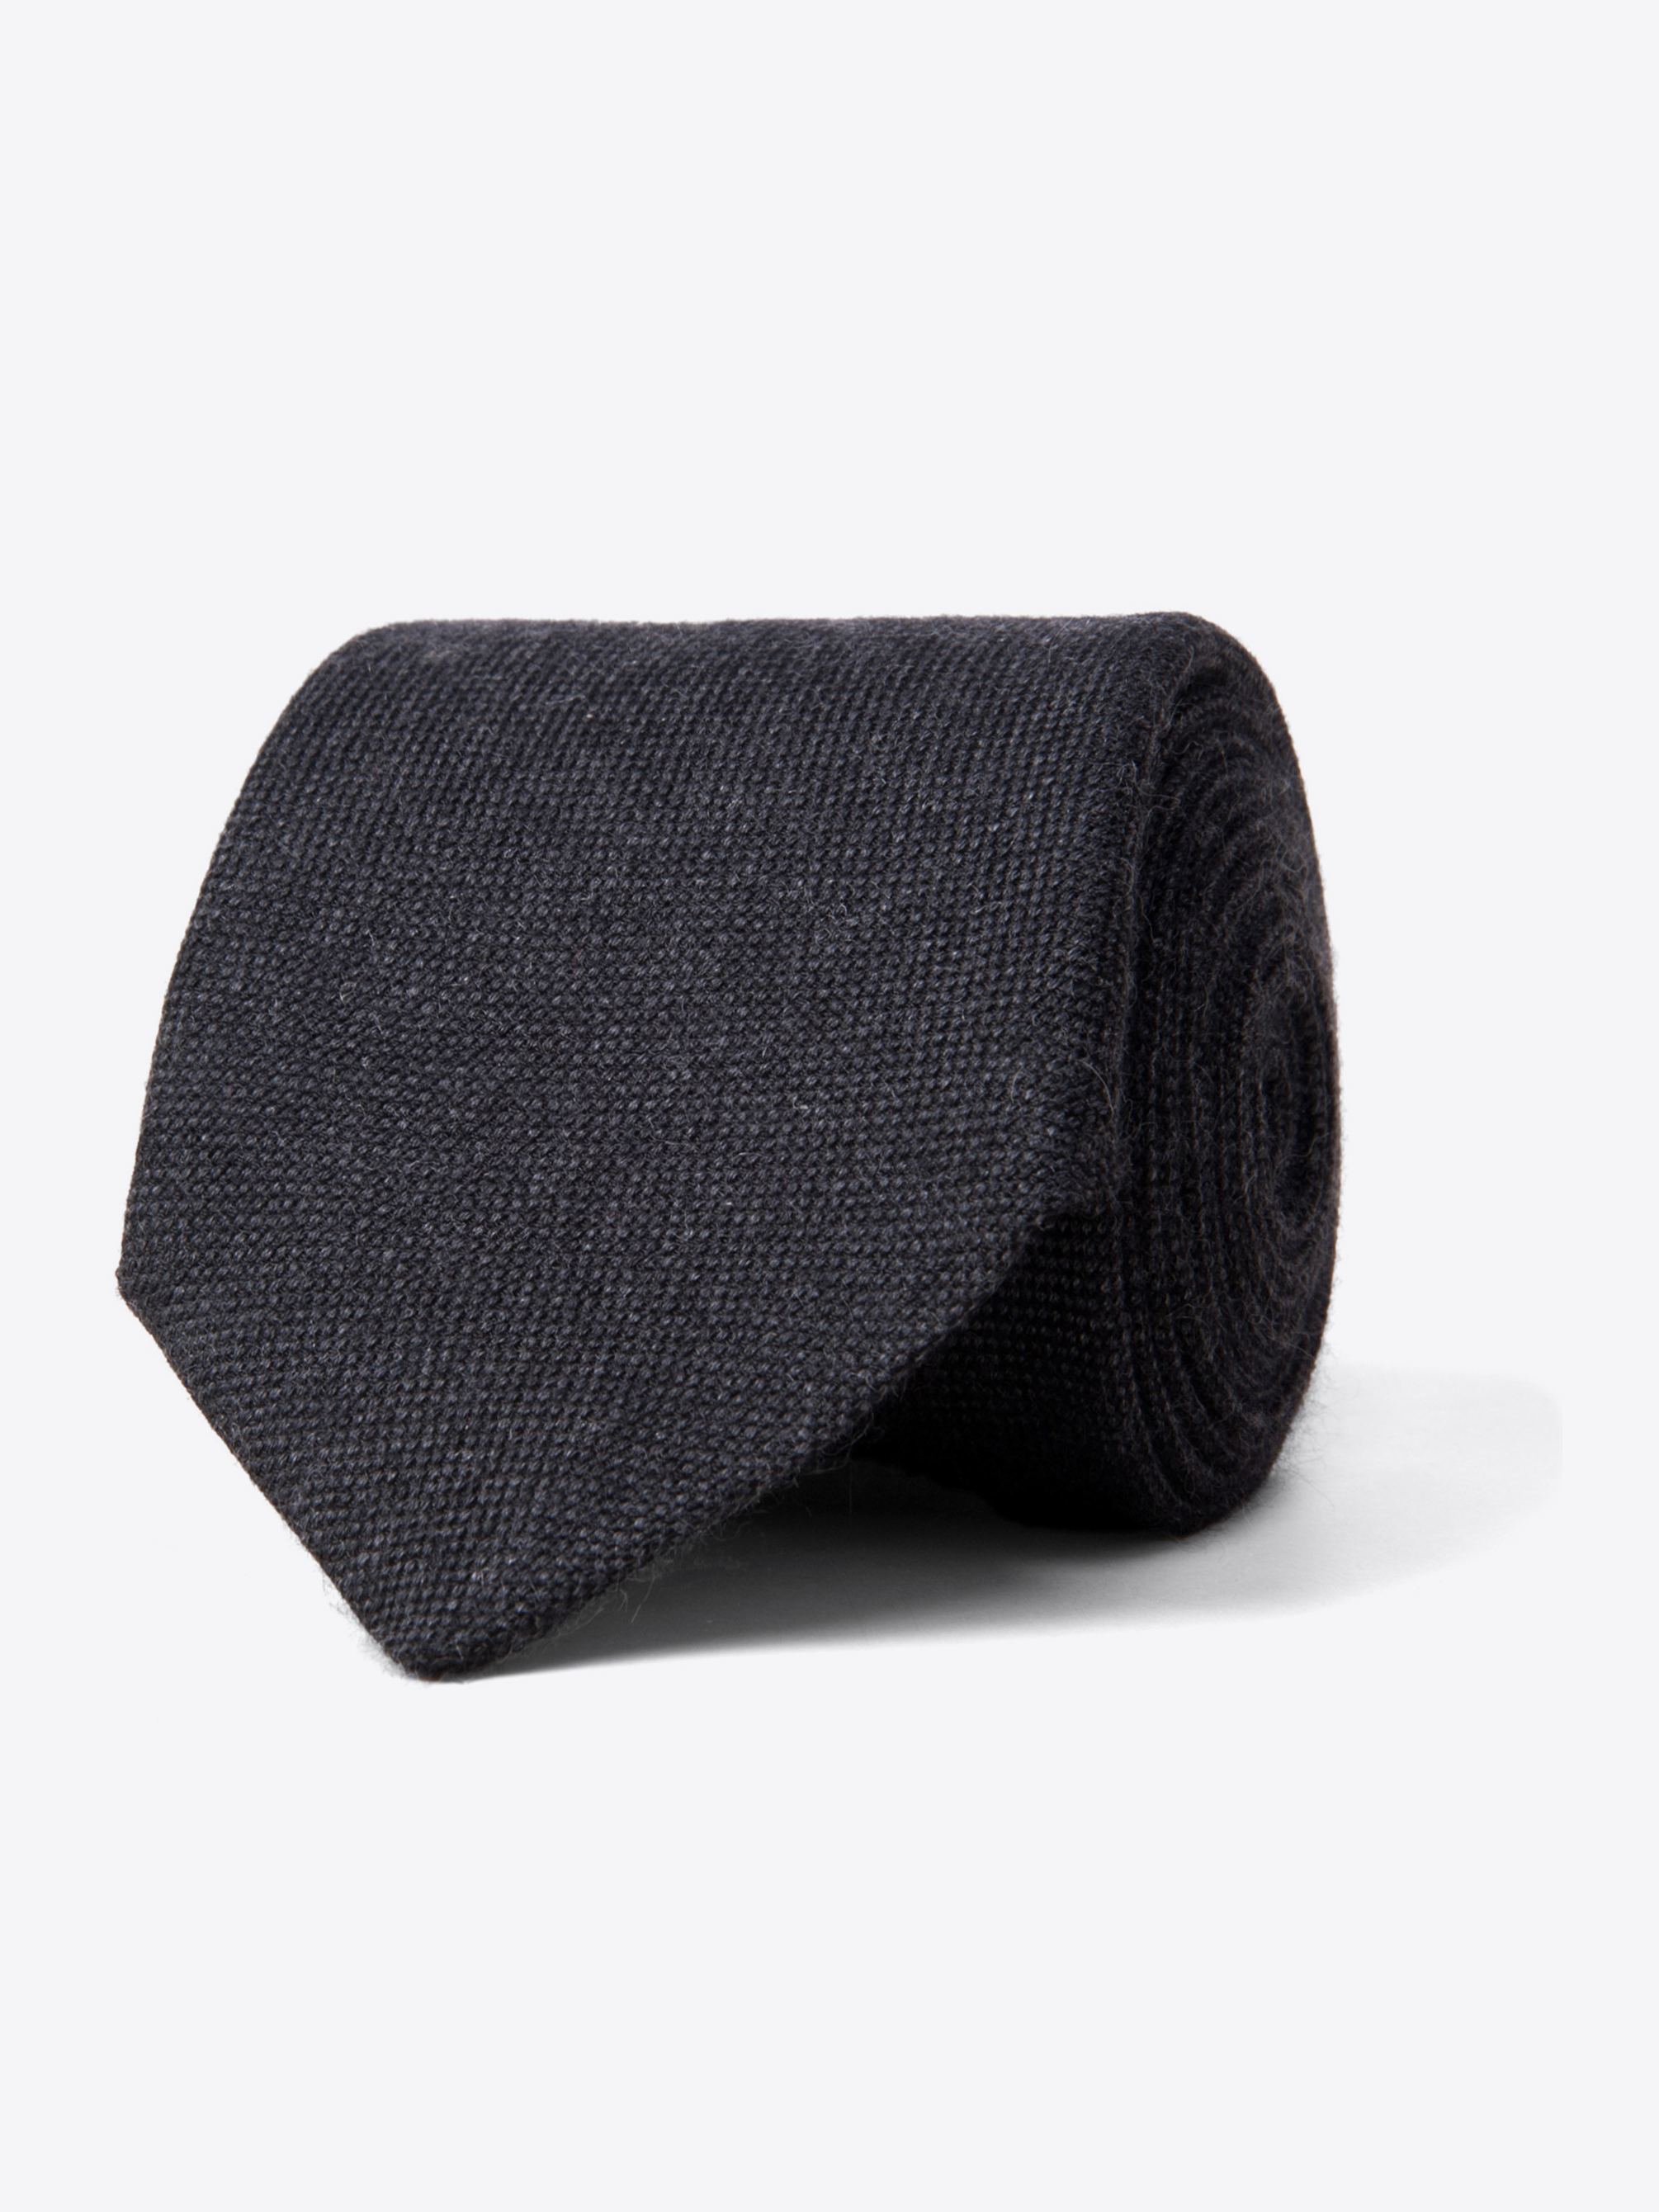 Zoom Image of Charcoal Solid Wool Tie